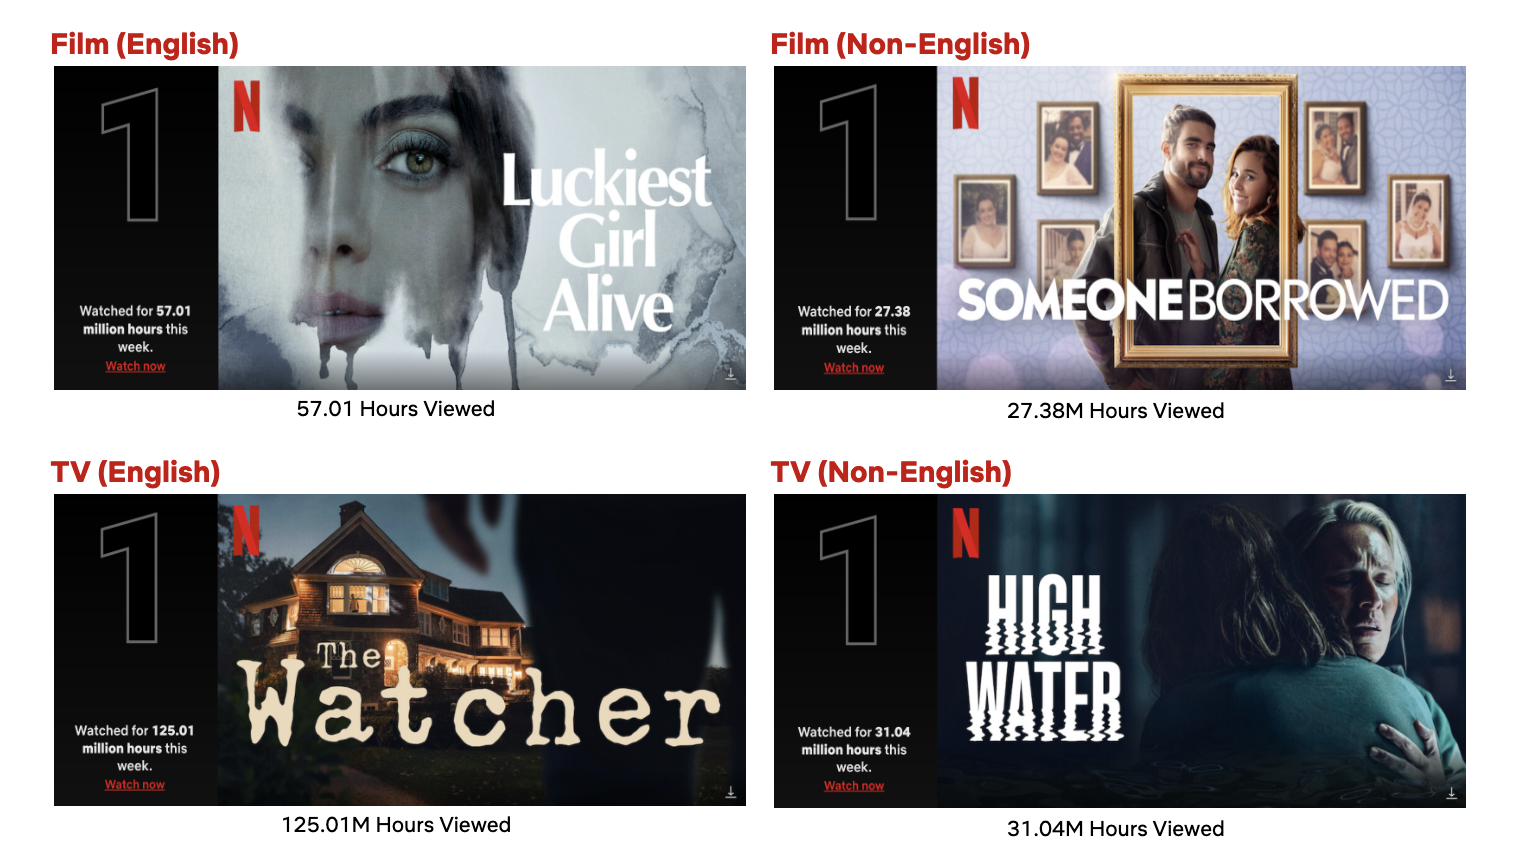 Top 10 Week of October 10:  Ryan Murphy Takes the Top Two Spots on the English TV List With  ‘The Watcher’ and ‘DAHMER - Monster’ 